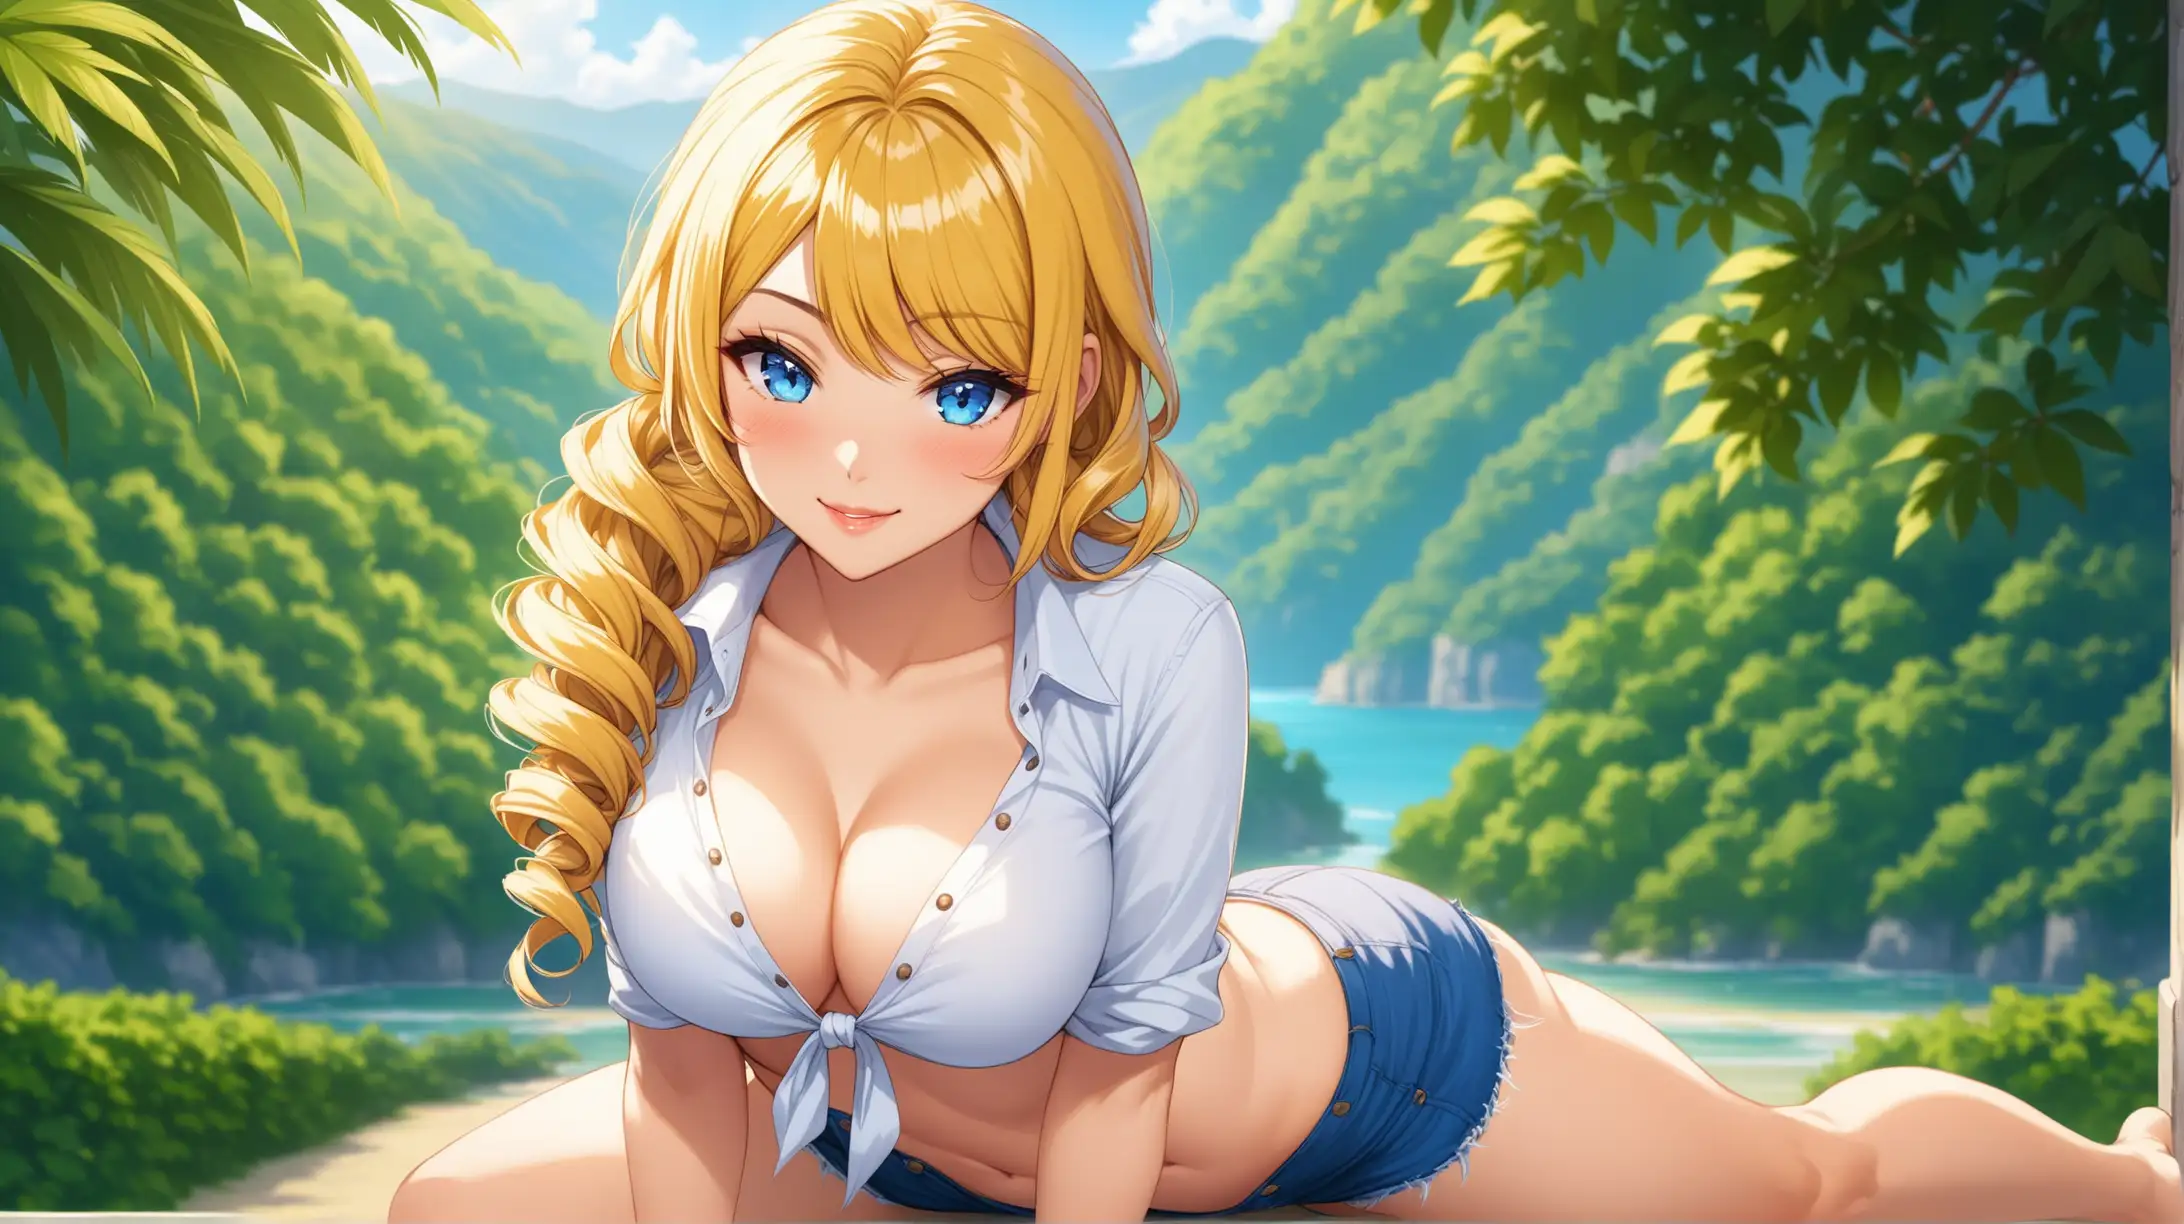 Draw the character Navia, long, blonde, drill hair, blue eyes, high quality, natural lighting, long shot, outdoors, seductive pose, casual outfit, revealing, smiling at the viewer